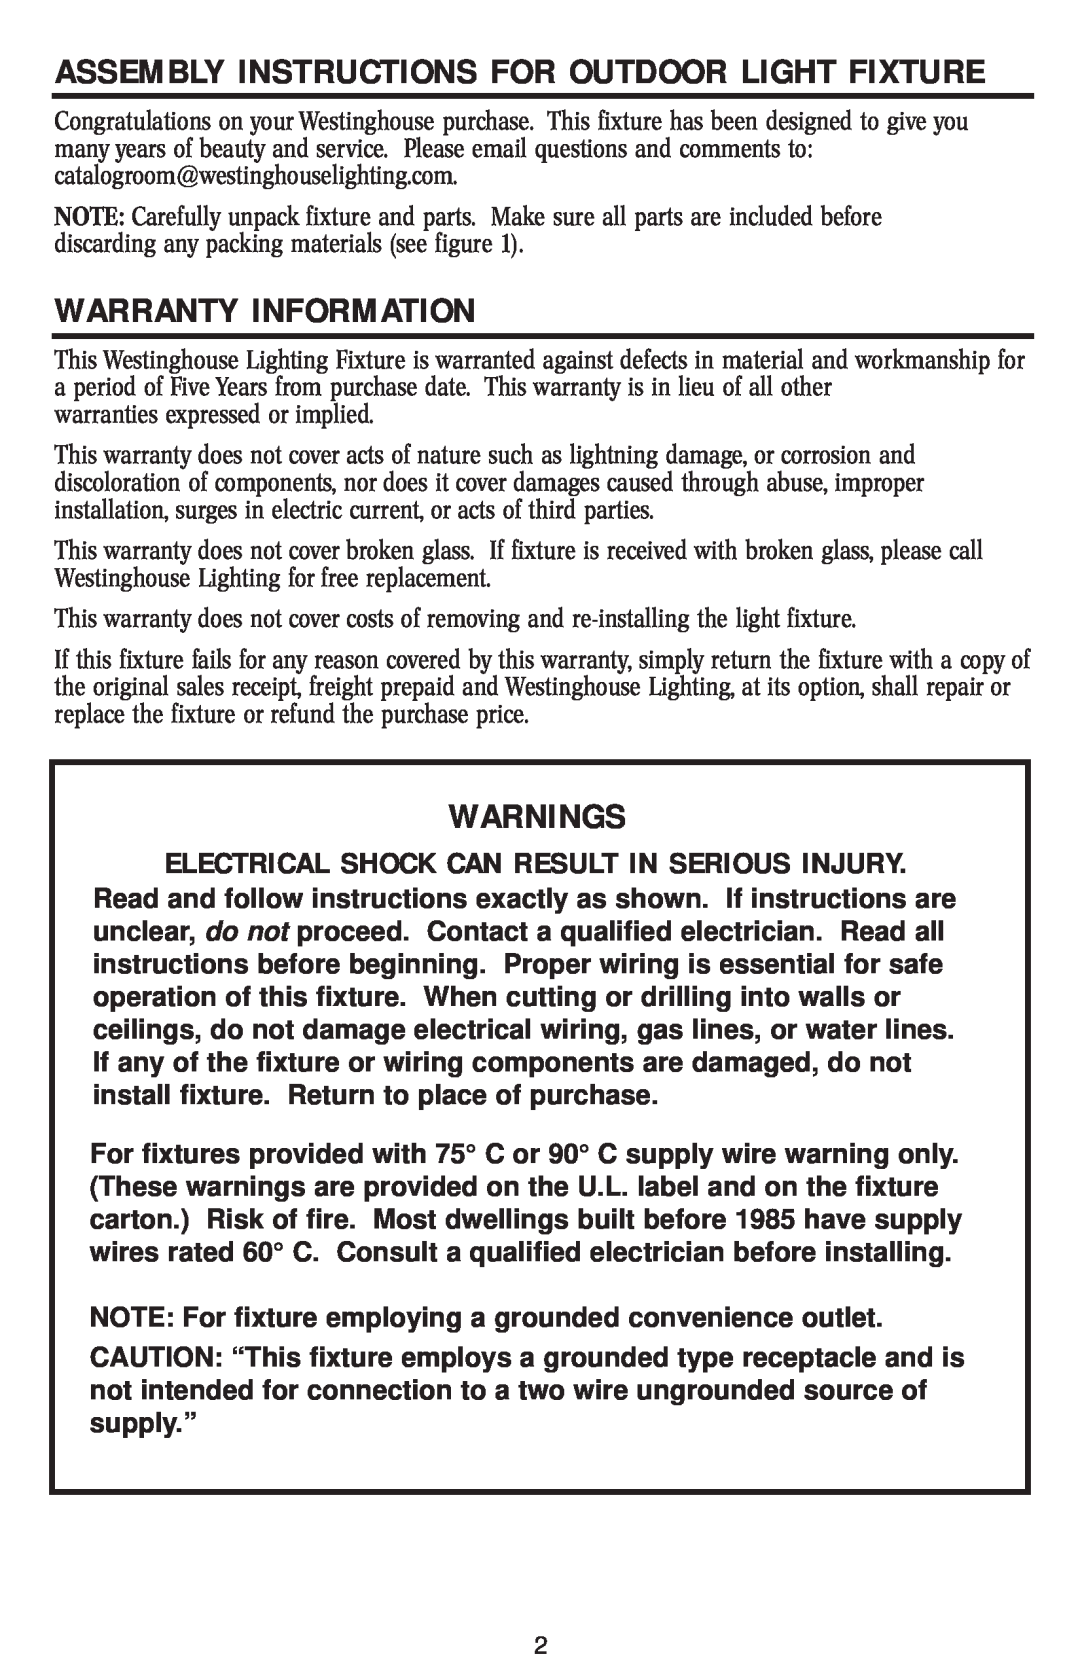 Westinghouse w-040 owner manual Warranty Information, Warnings, Assembly Instructions For Outdoor Light Fixture 